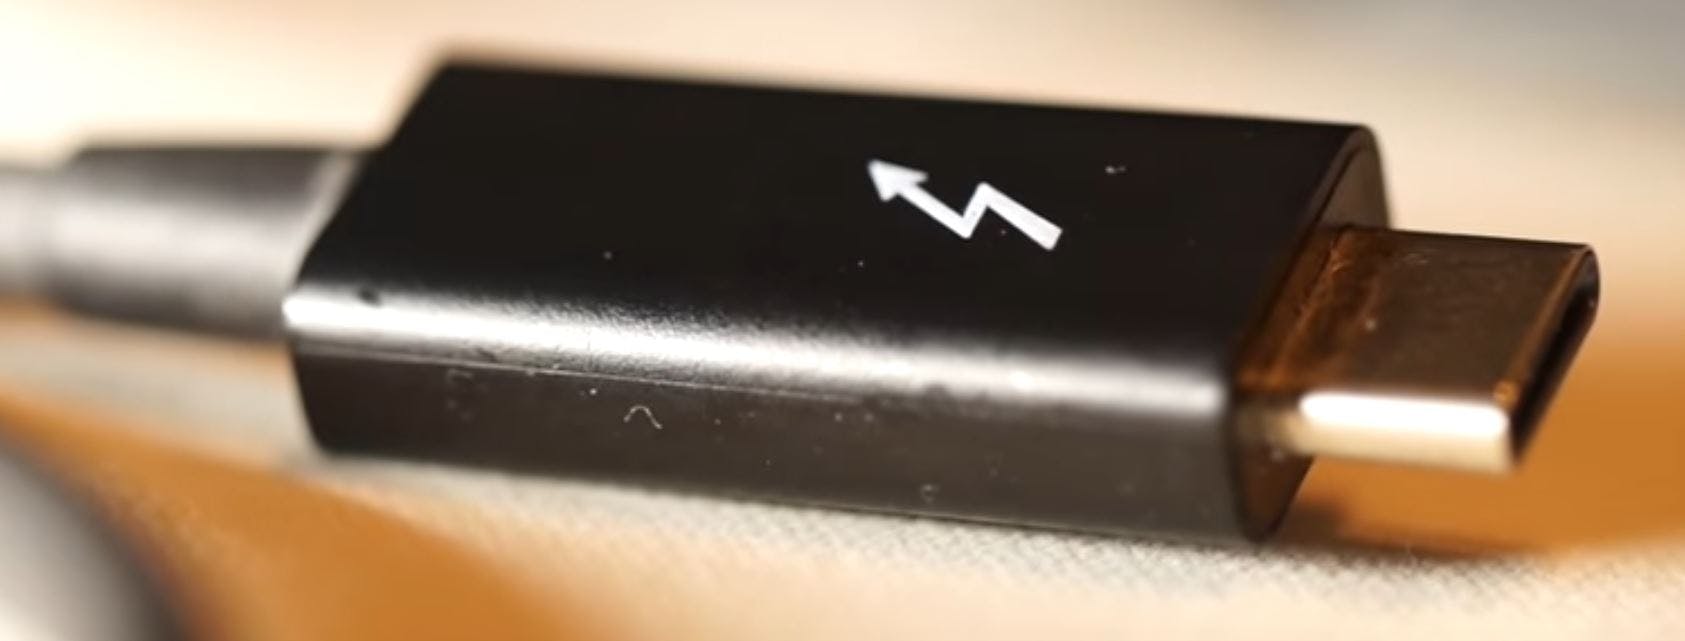 This symbol indicates a Thunderbolt 3 compliant cable or port